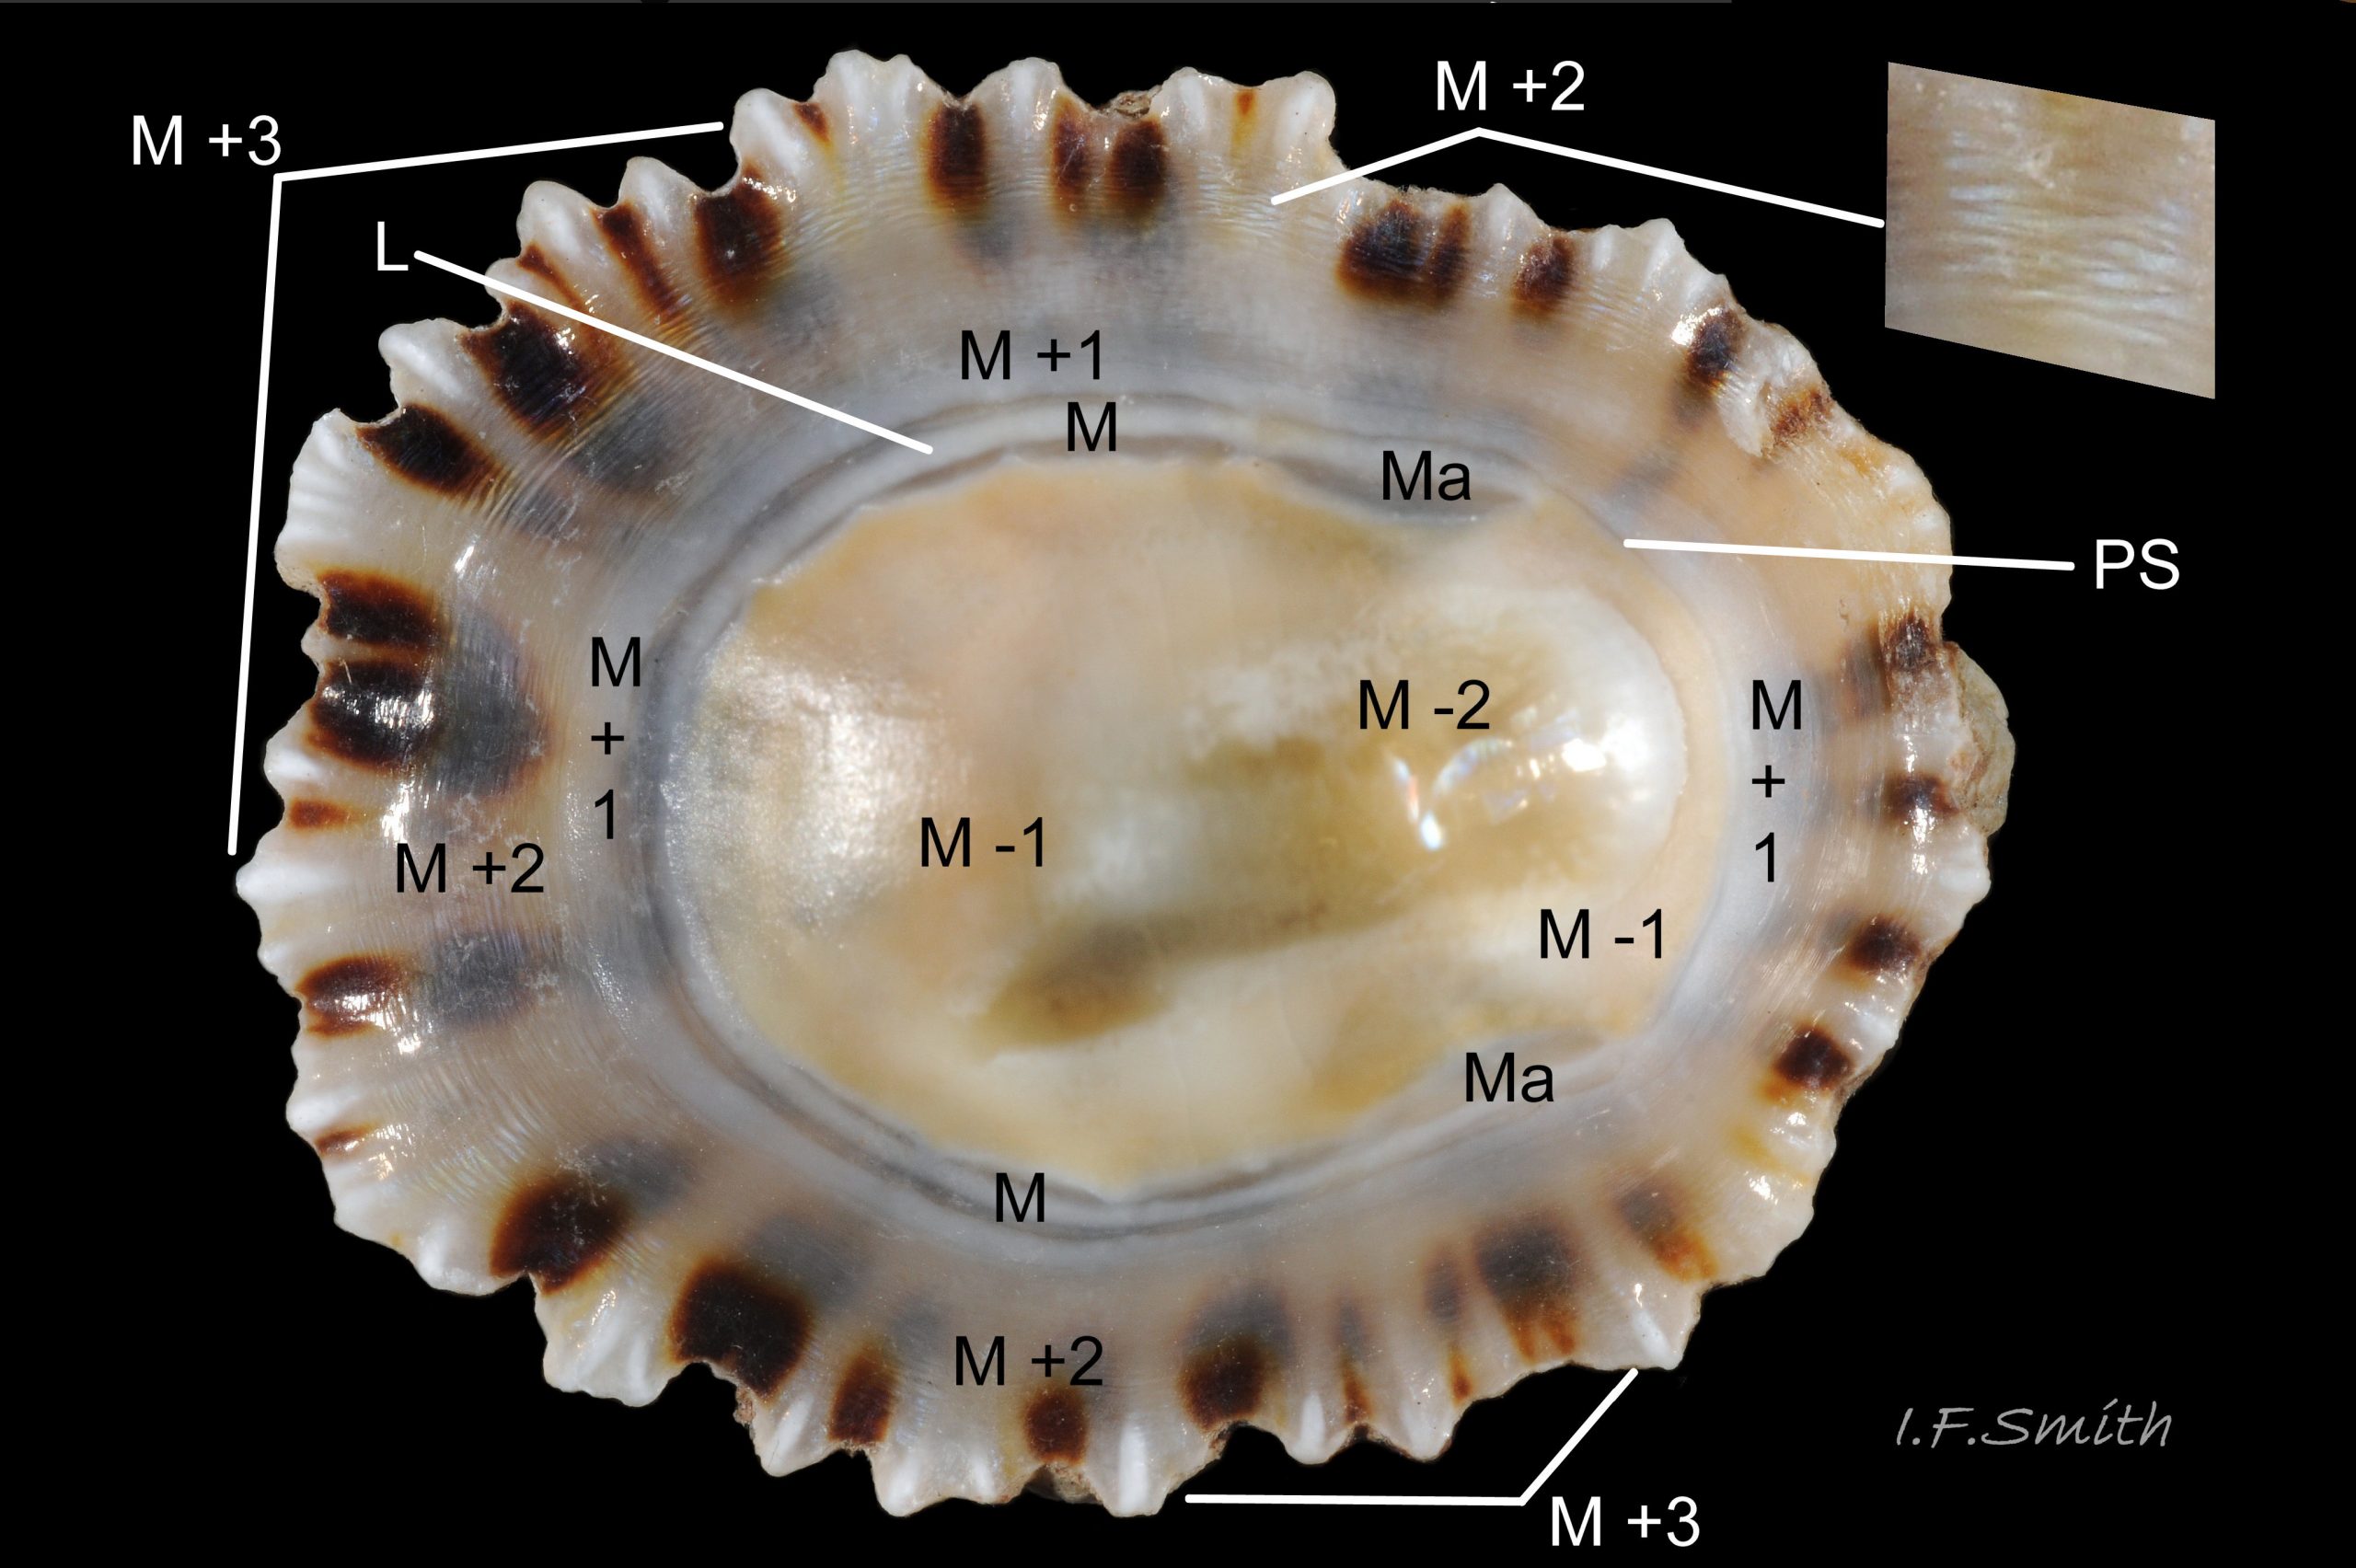 03 Patella shell. Interior of Patella depressa shell. Length 24.9 mm. Inset is close-up of concentric iridescent ripples in M +2.